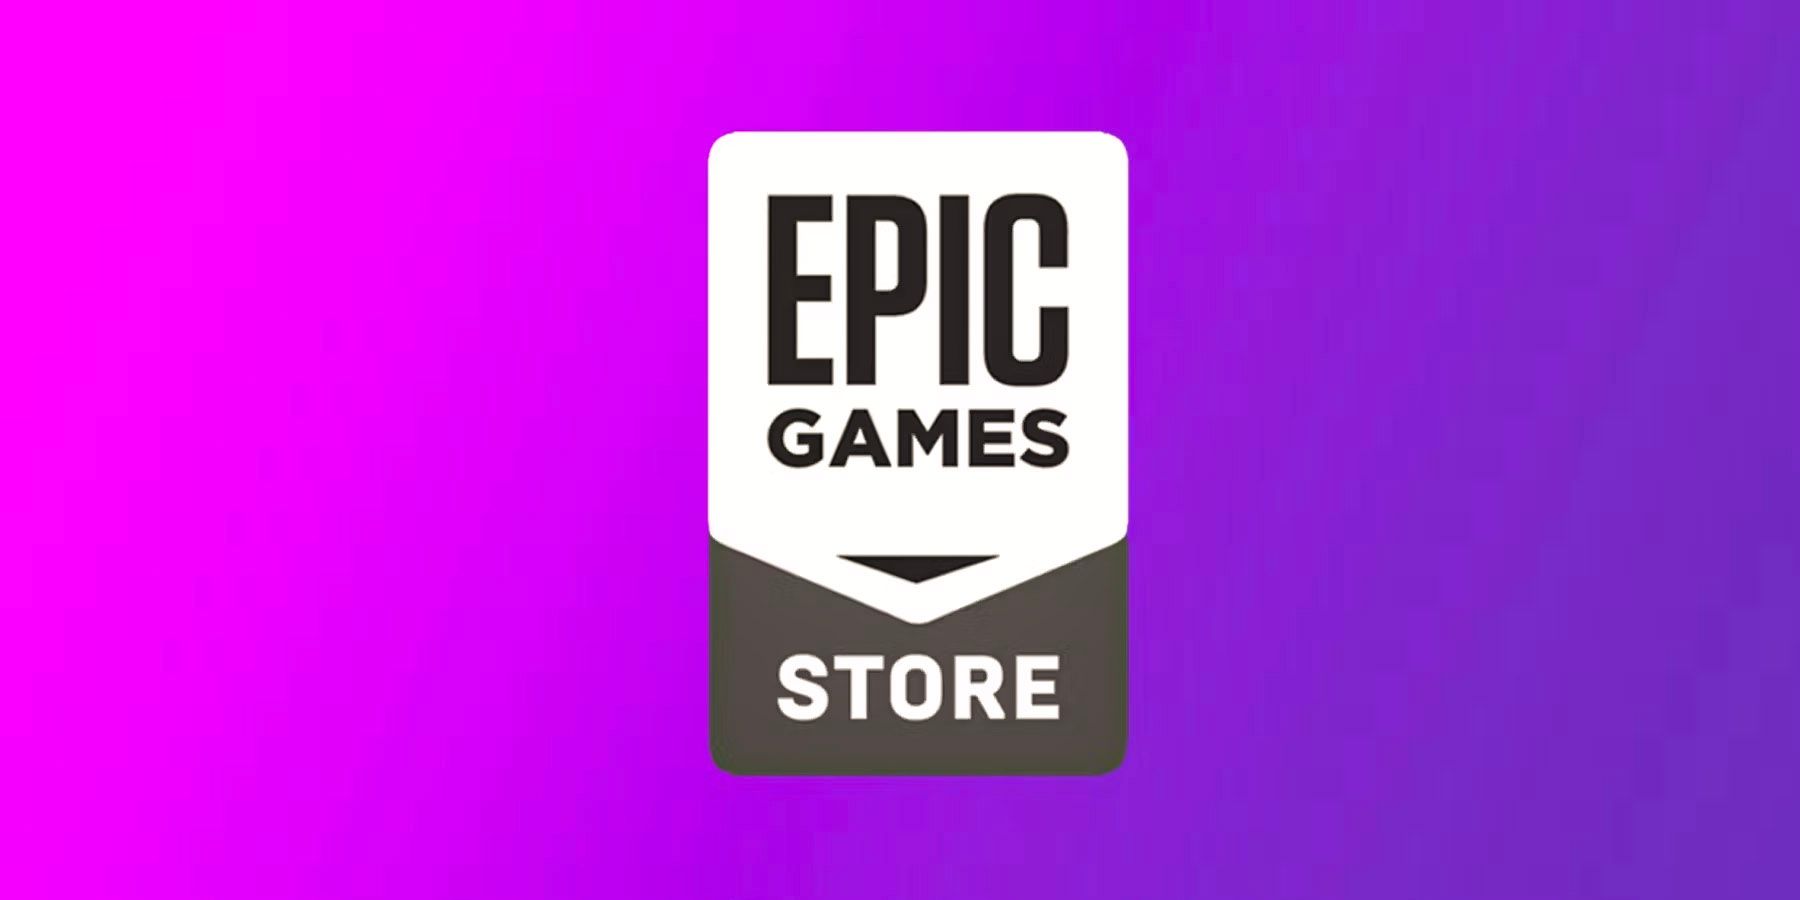 Epic Games Store Is Giving Away Golden Light; Here Is How You Can